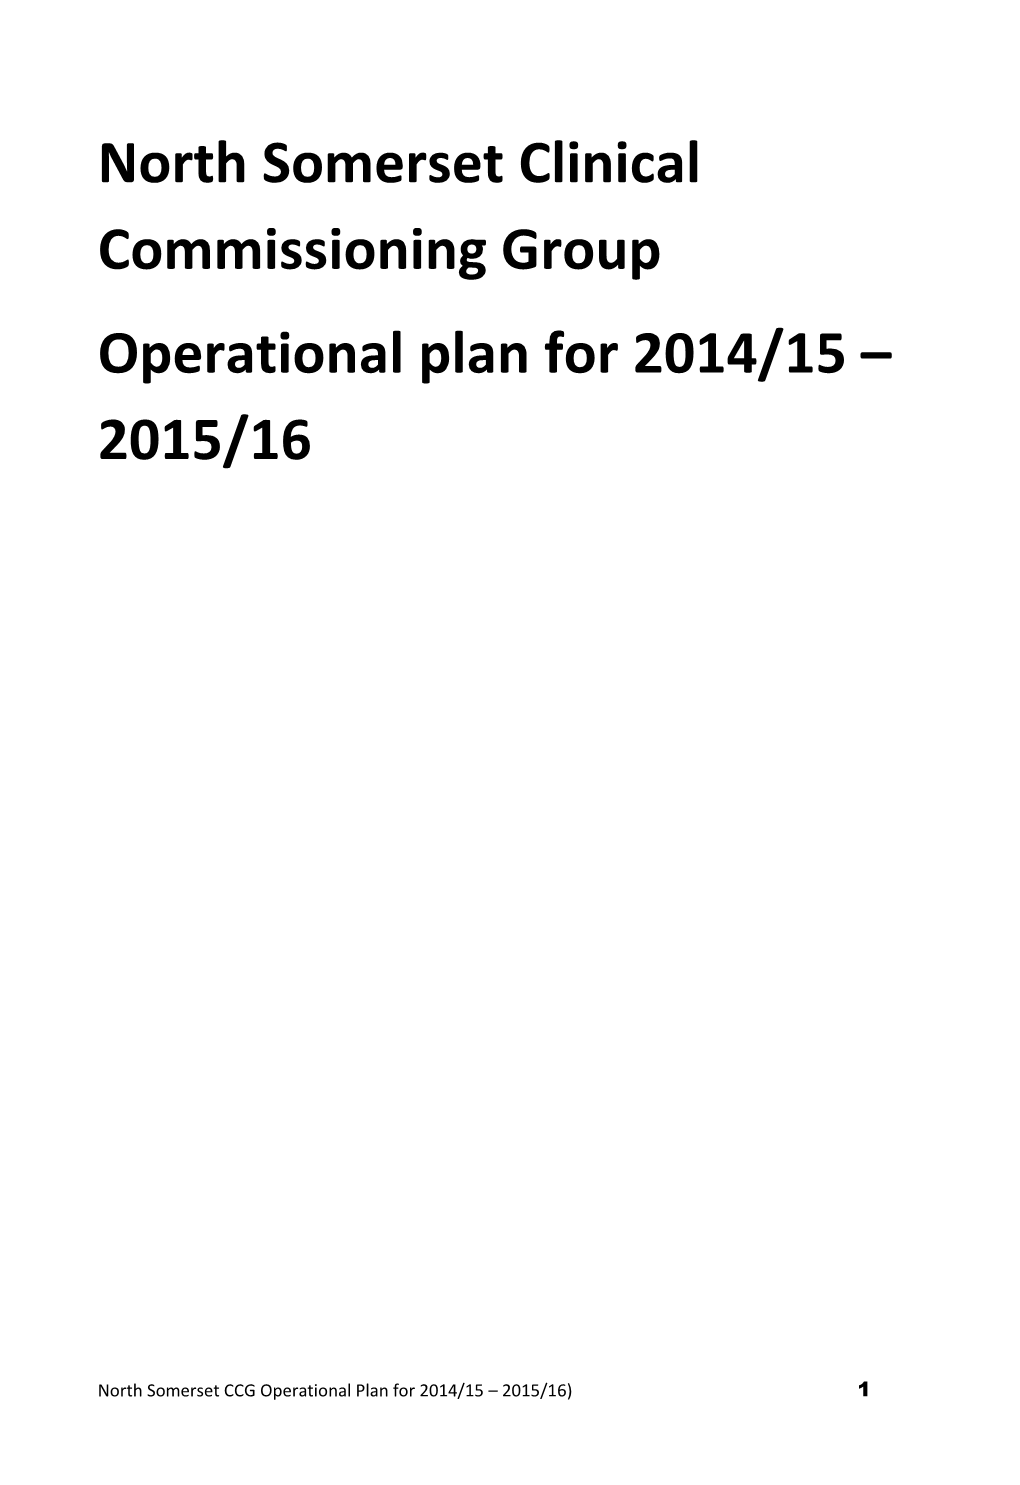 North Somerset Clinical Commissioning Group Operational Plan for 2014/15 – 2015/16